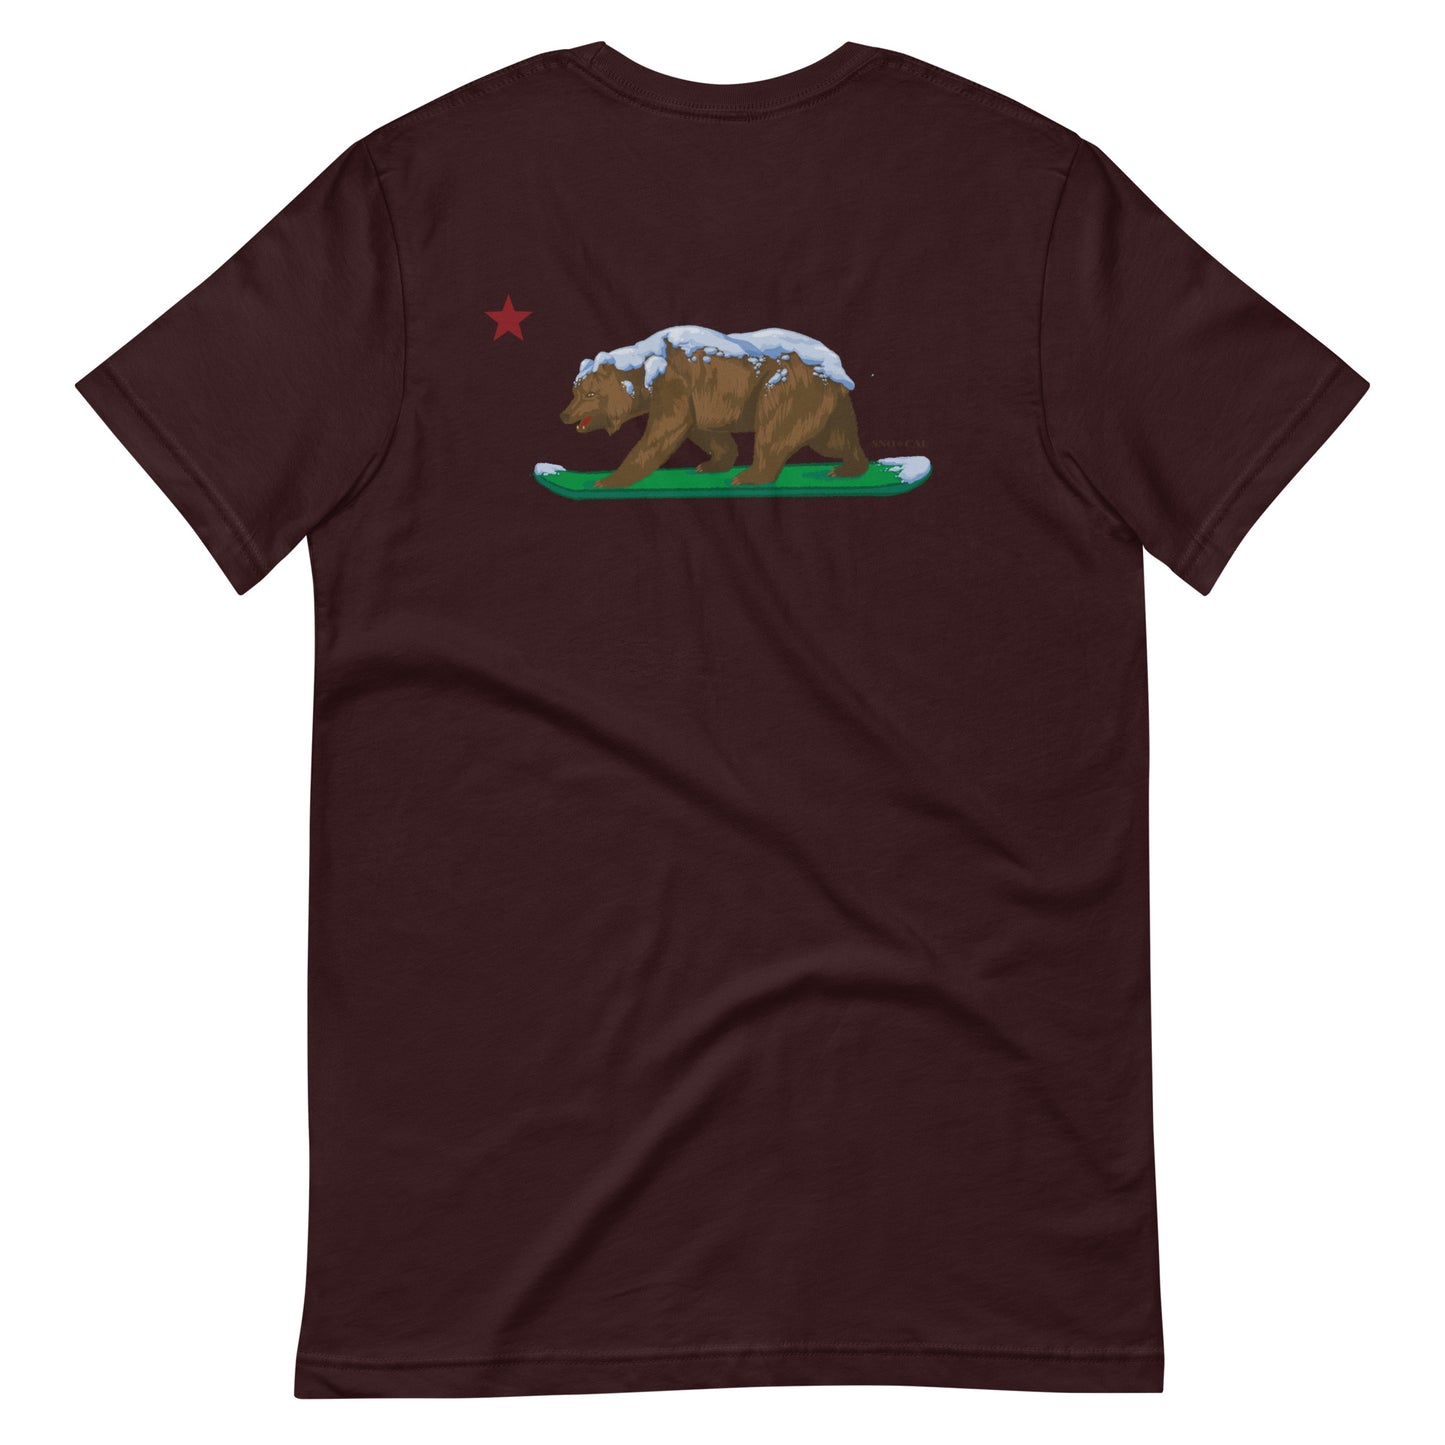 Goldie the CA Grizzly shirt